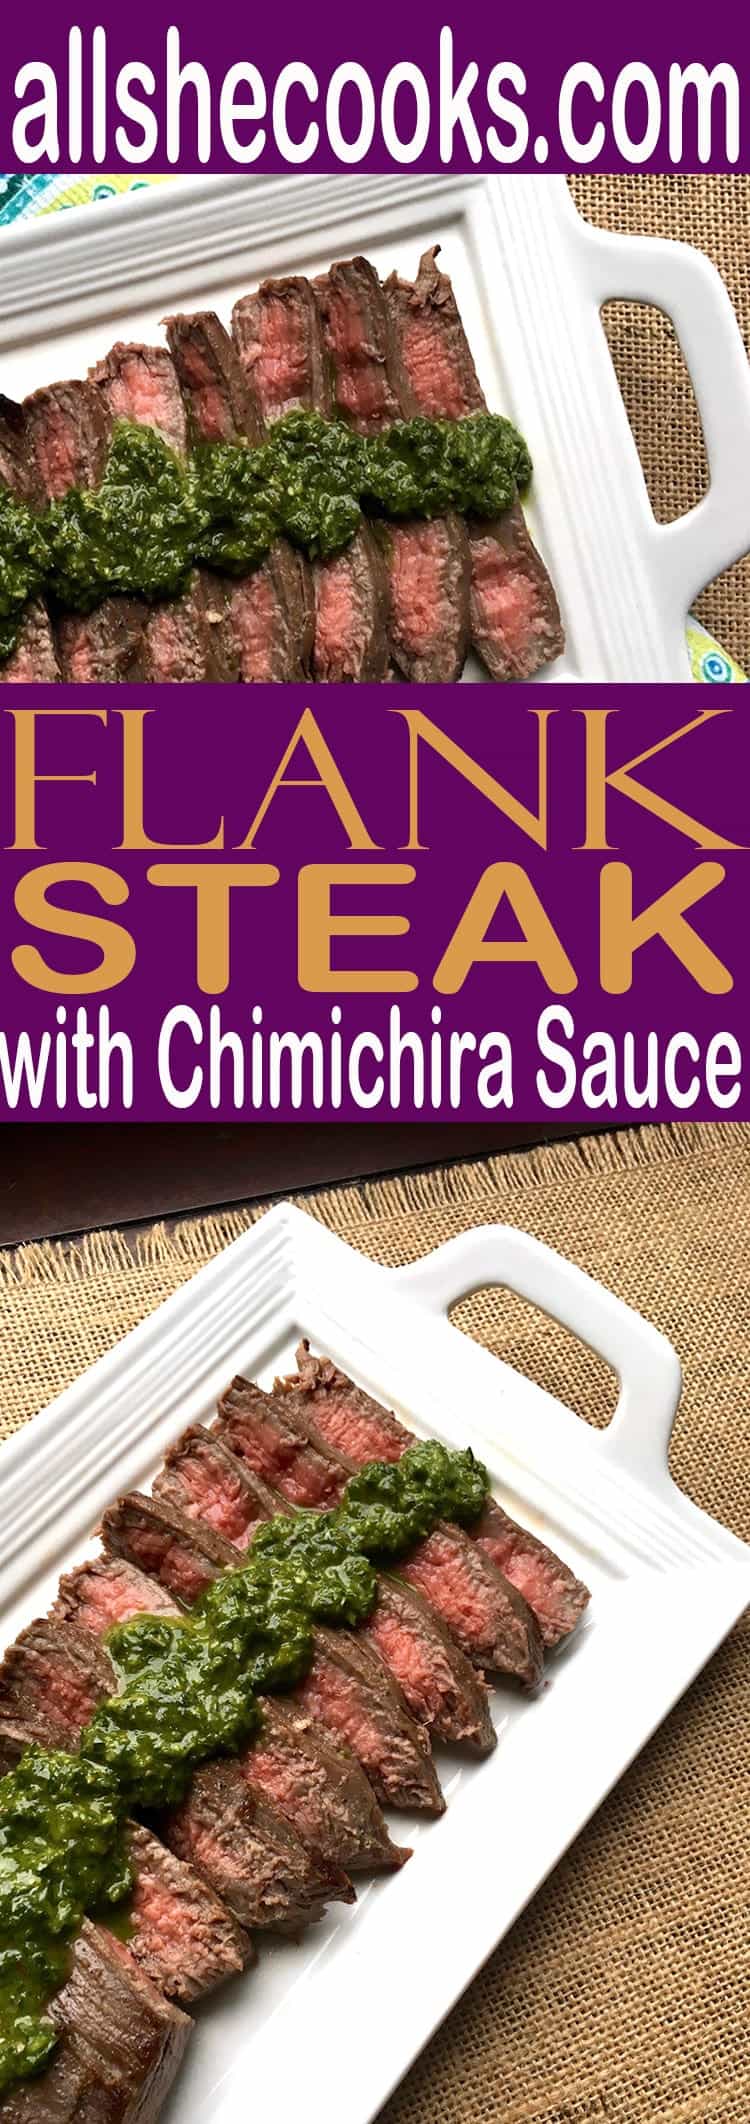 Flank Steak with Chimichira Sauce is an exceptionally flavorful steak recipe that you'll want to serve up at your next dinner party or for an easy family dinner recipe.